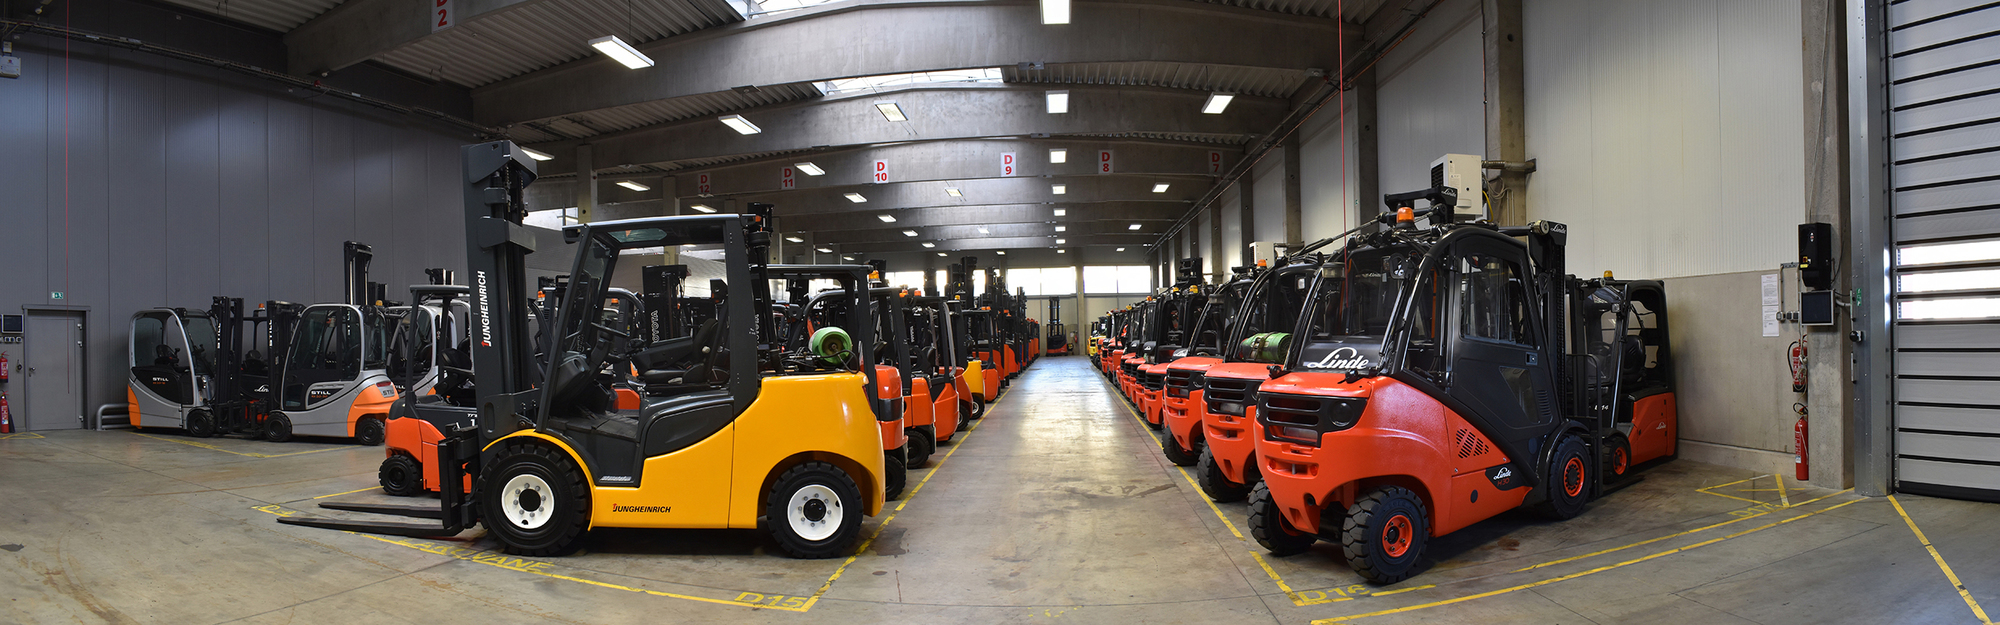 CHUF – cheap used forklifts undefined: 2 kép.